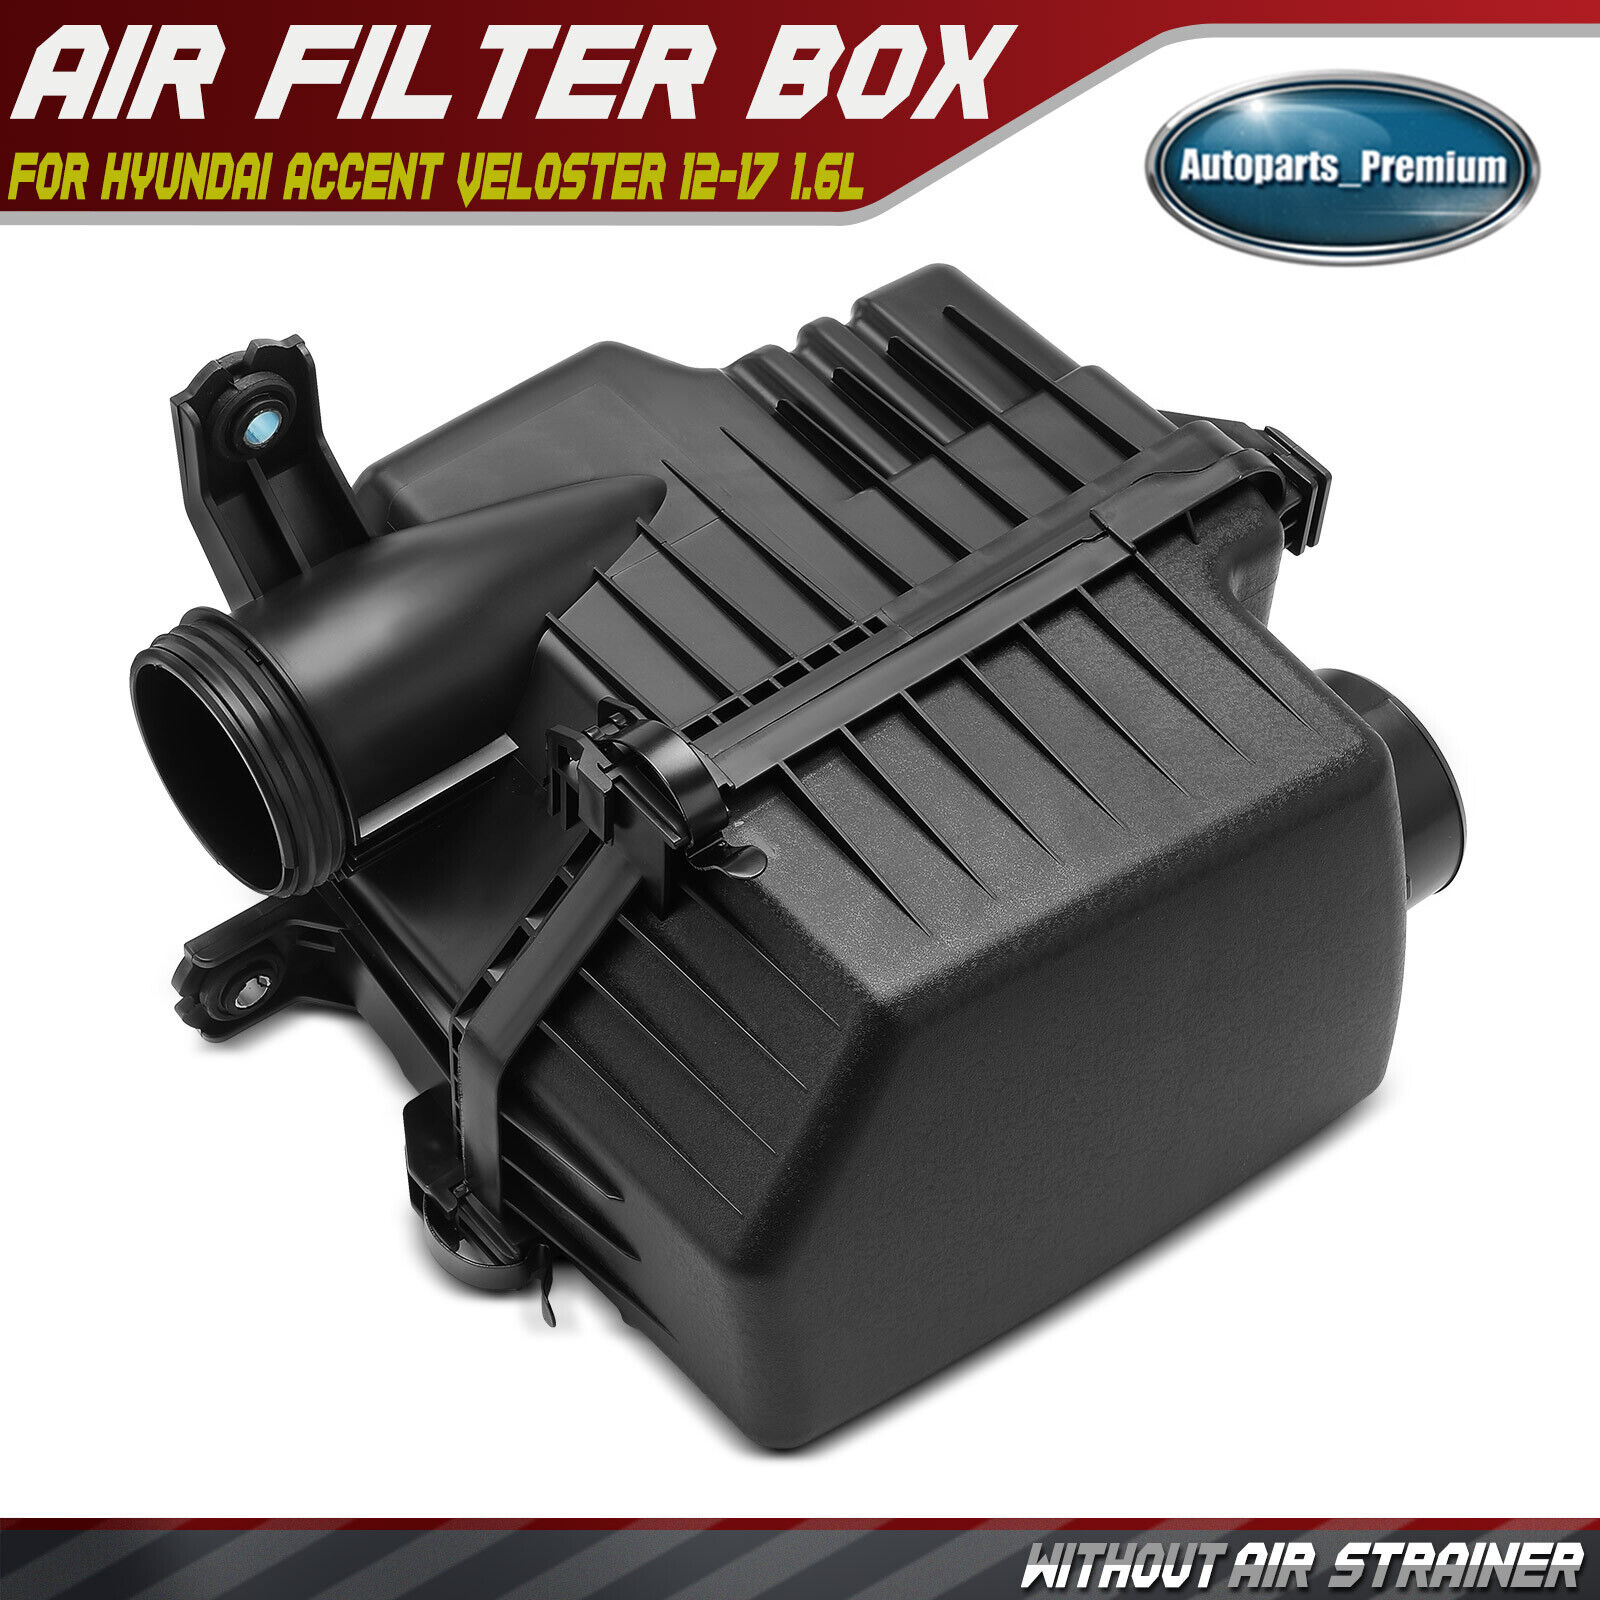 Air Cleaner Intake Filter Box for Hyundai Accent Veloster 2012 2013-2017 L4 1.6L